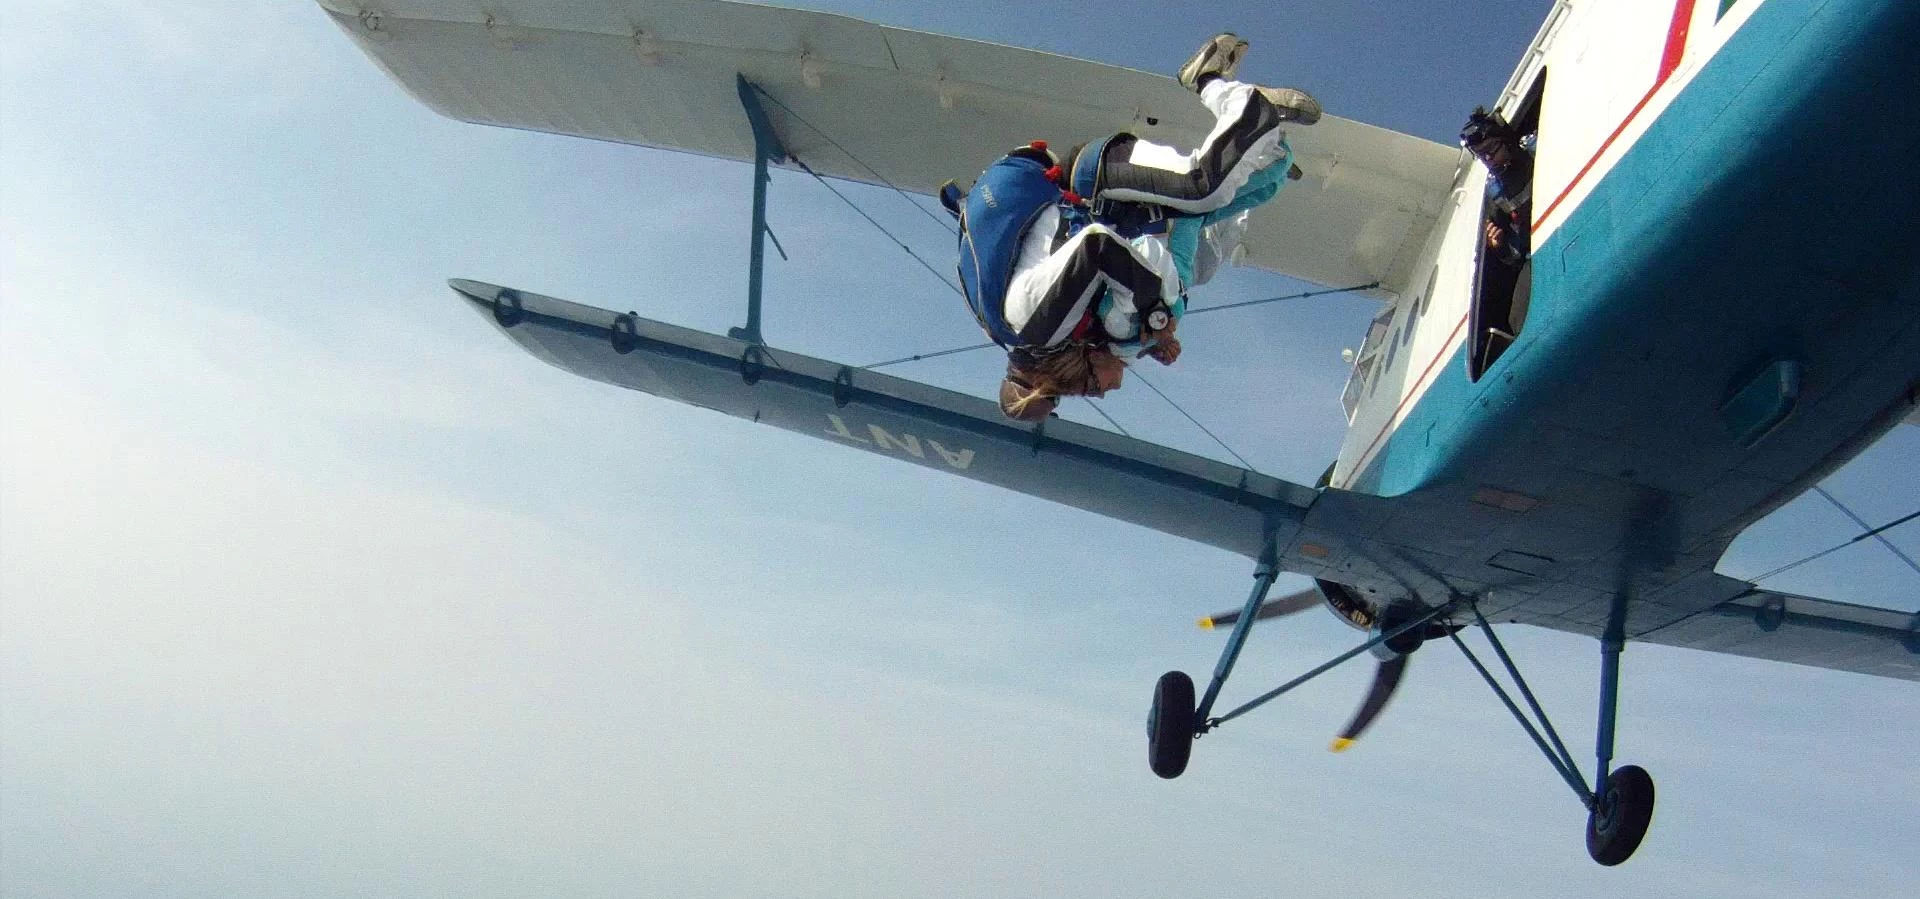 Will you take on a skydive for DSN?